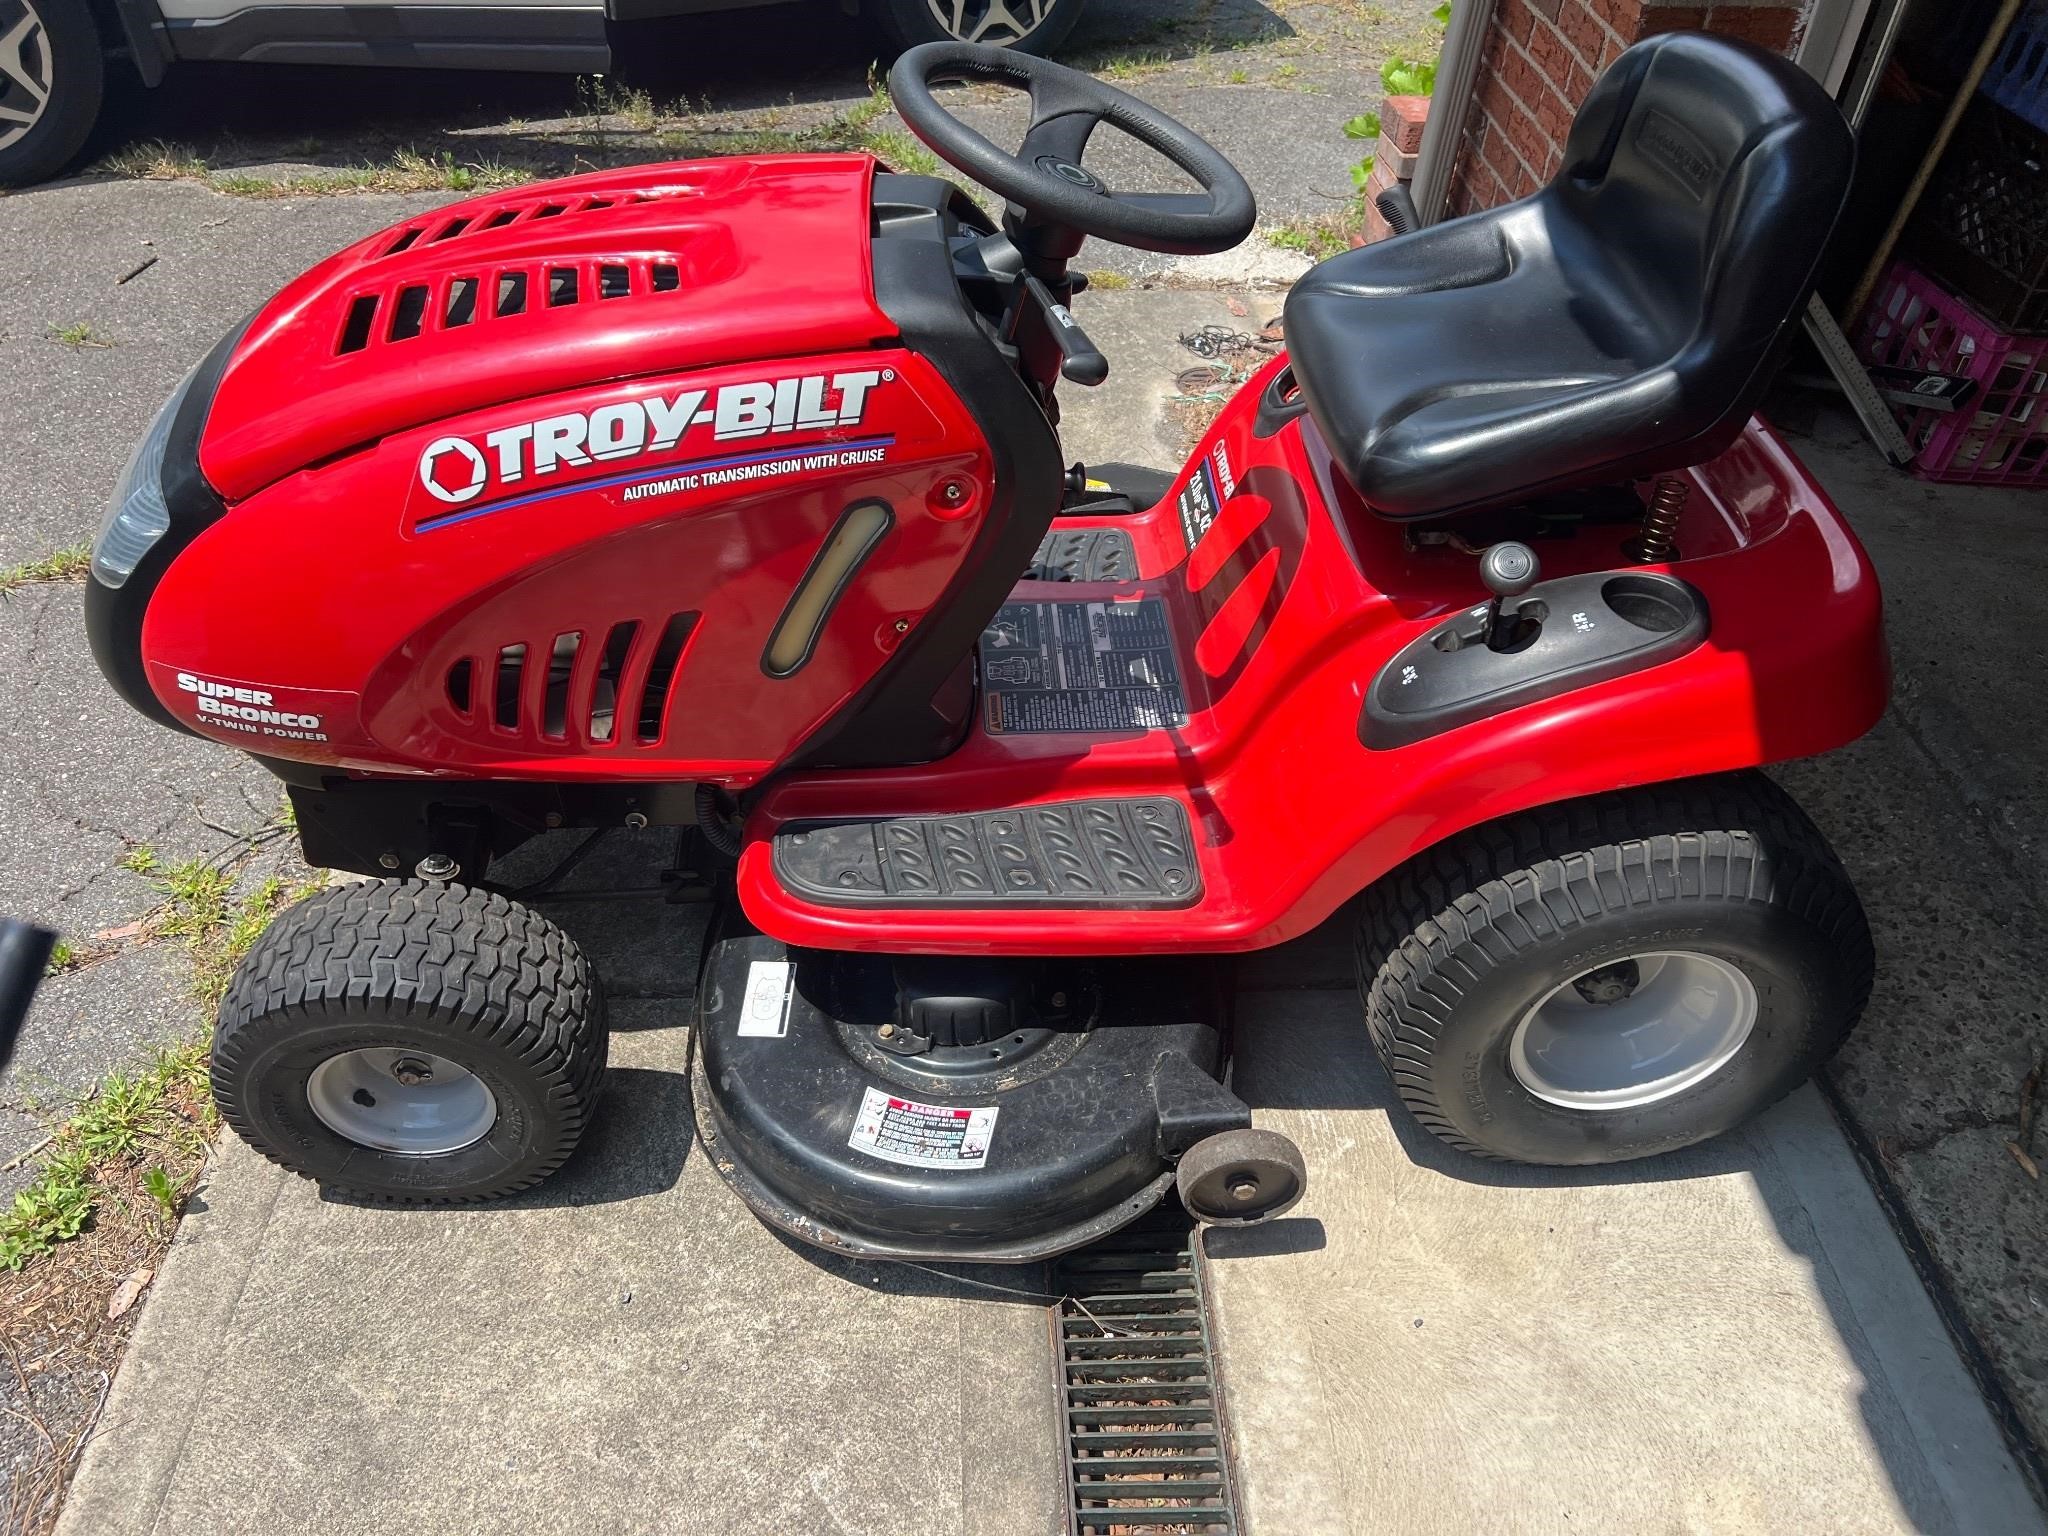 42” 21HP Troy Built Riding Mower Auto w/ Cruise